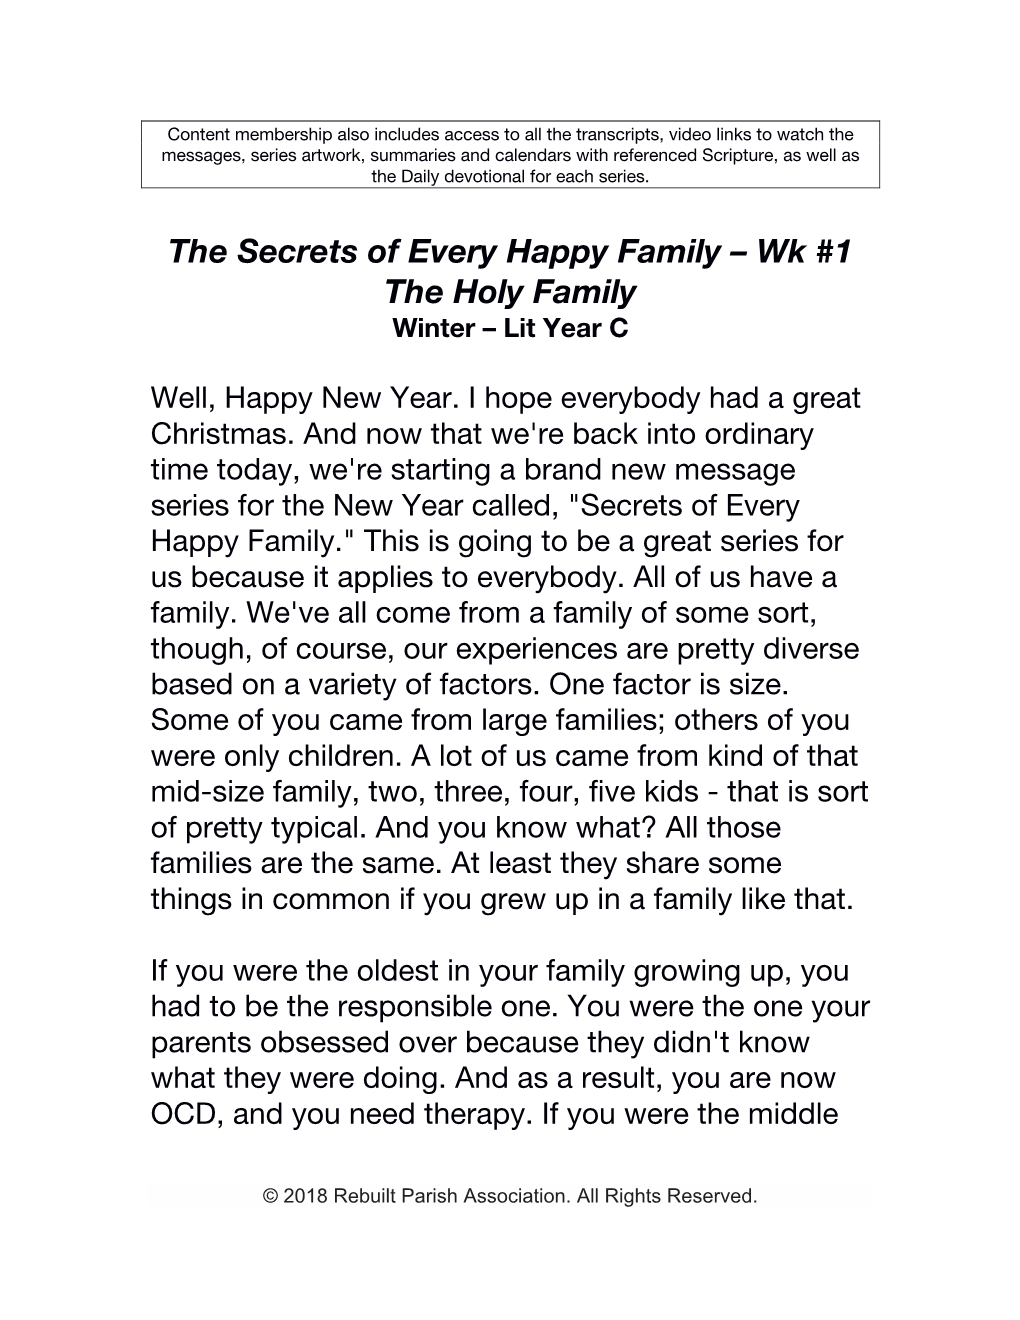 The Secrets of Every Happy Family – Wk #1 the Holy Family Winter – Lit Year C